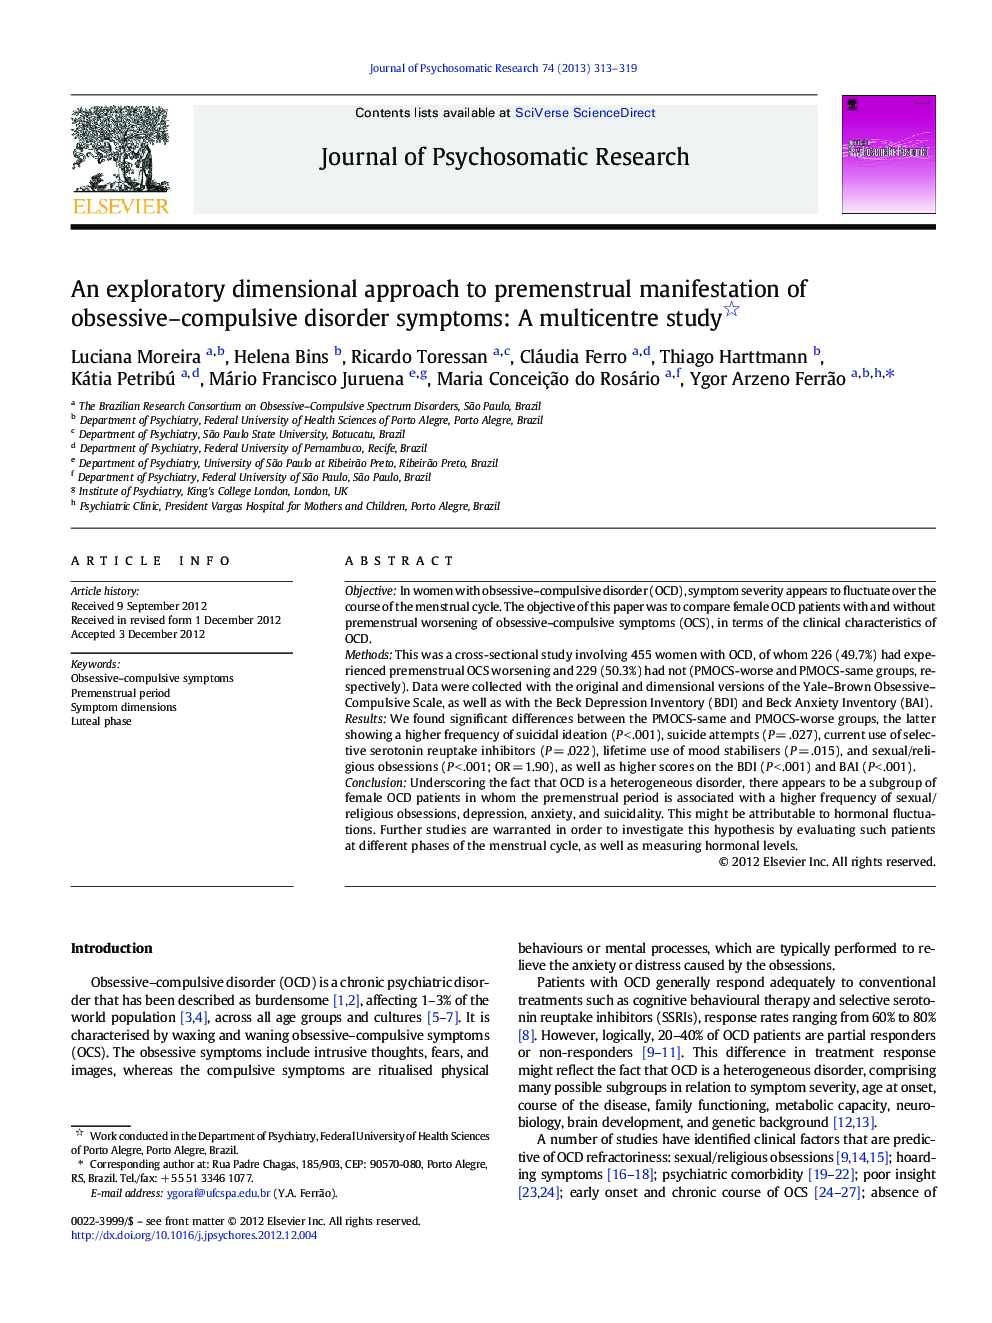 An exploratory dimensional approach to premenstrual manifestation of obsessive–compulsive disorder symptoms: A multicentre study 